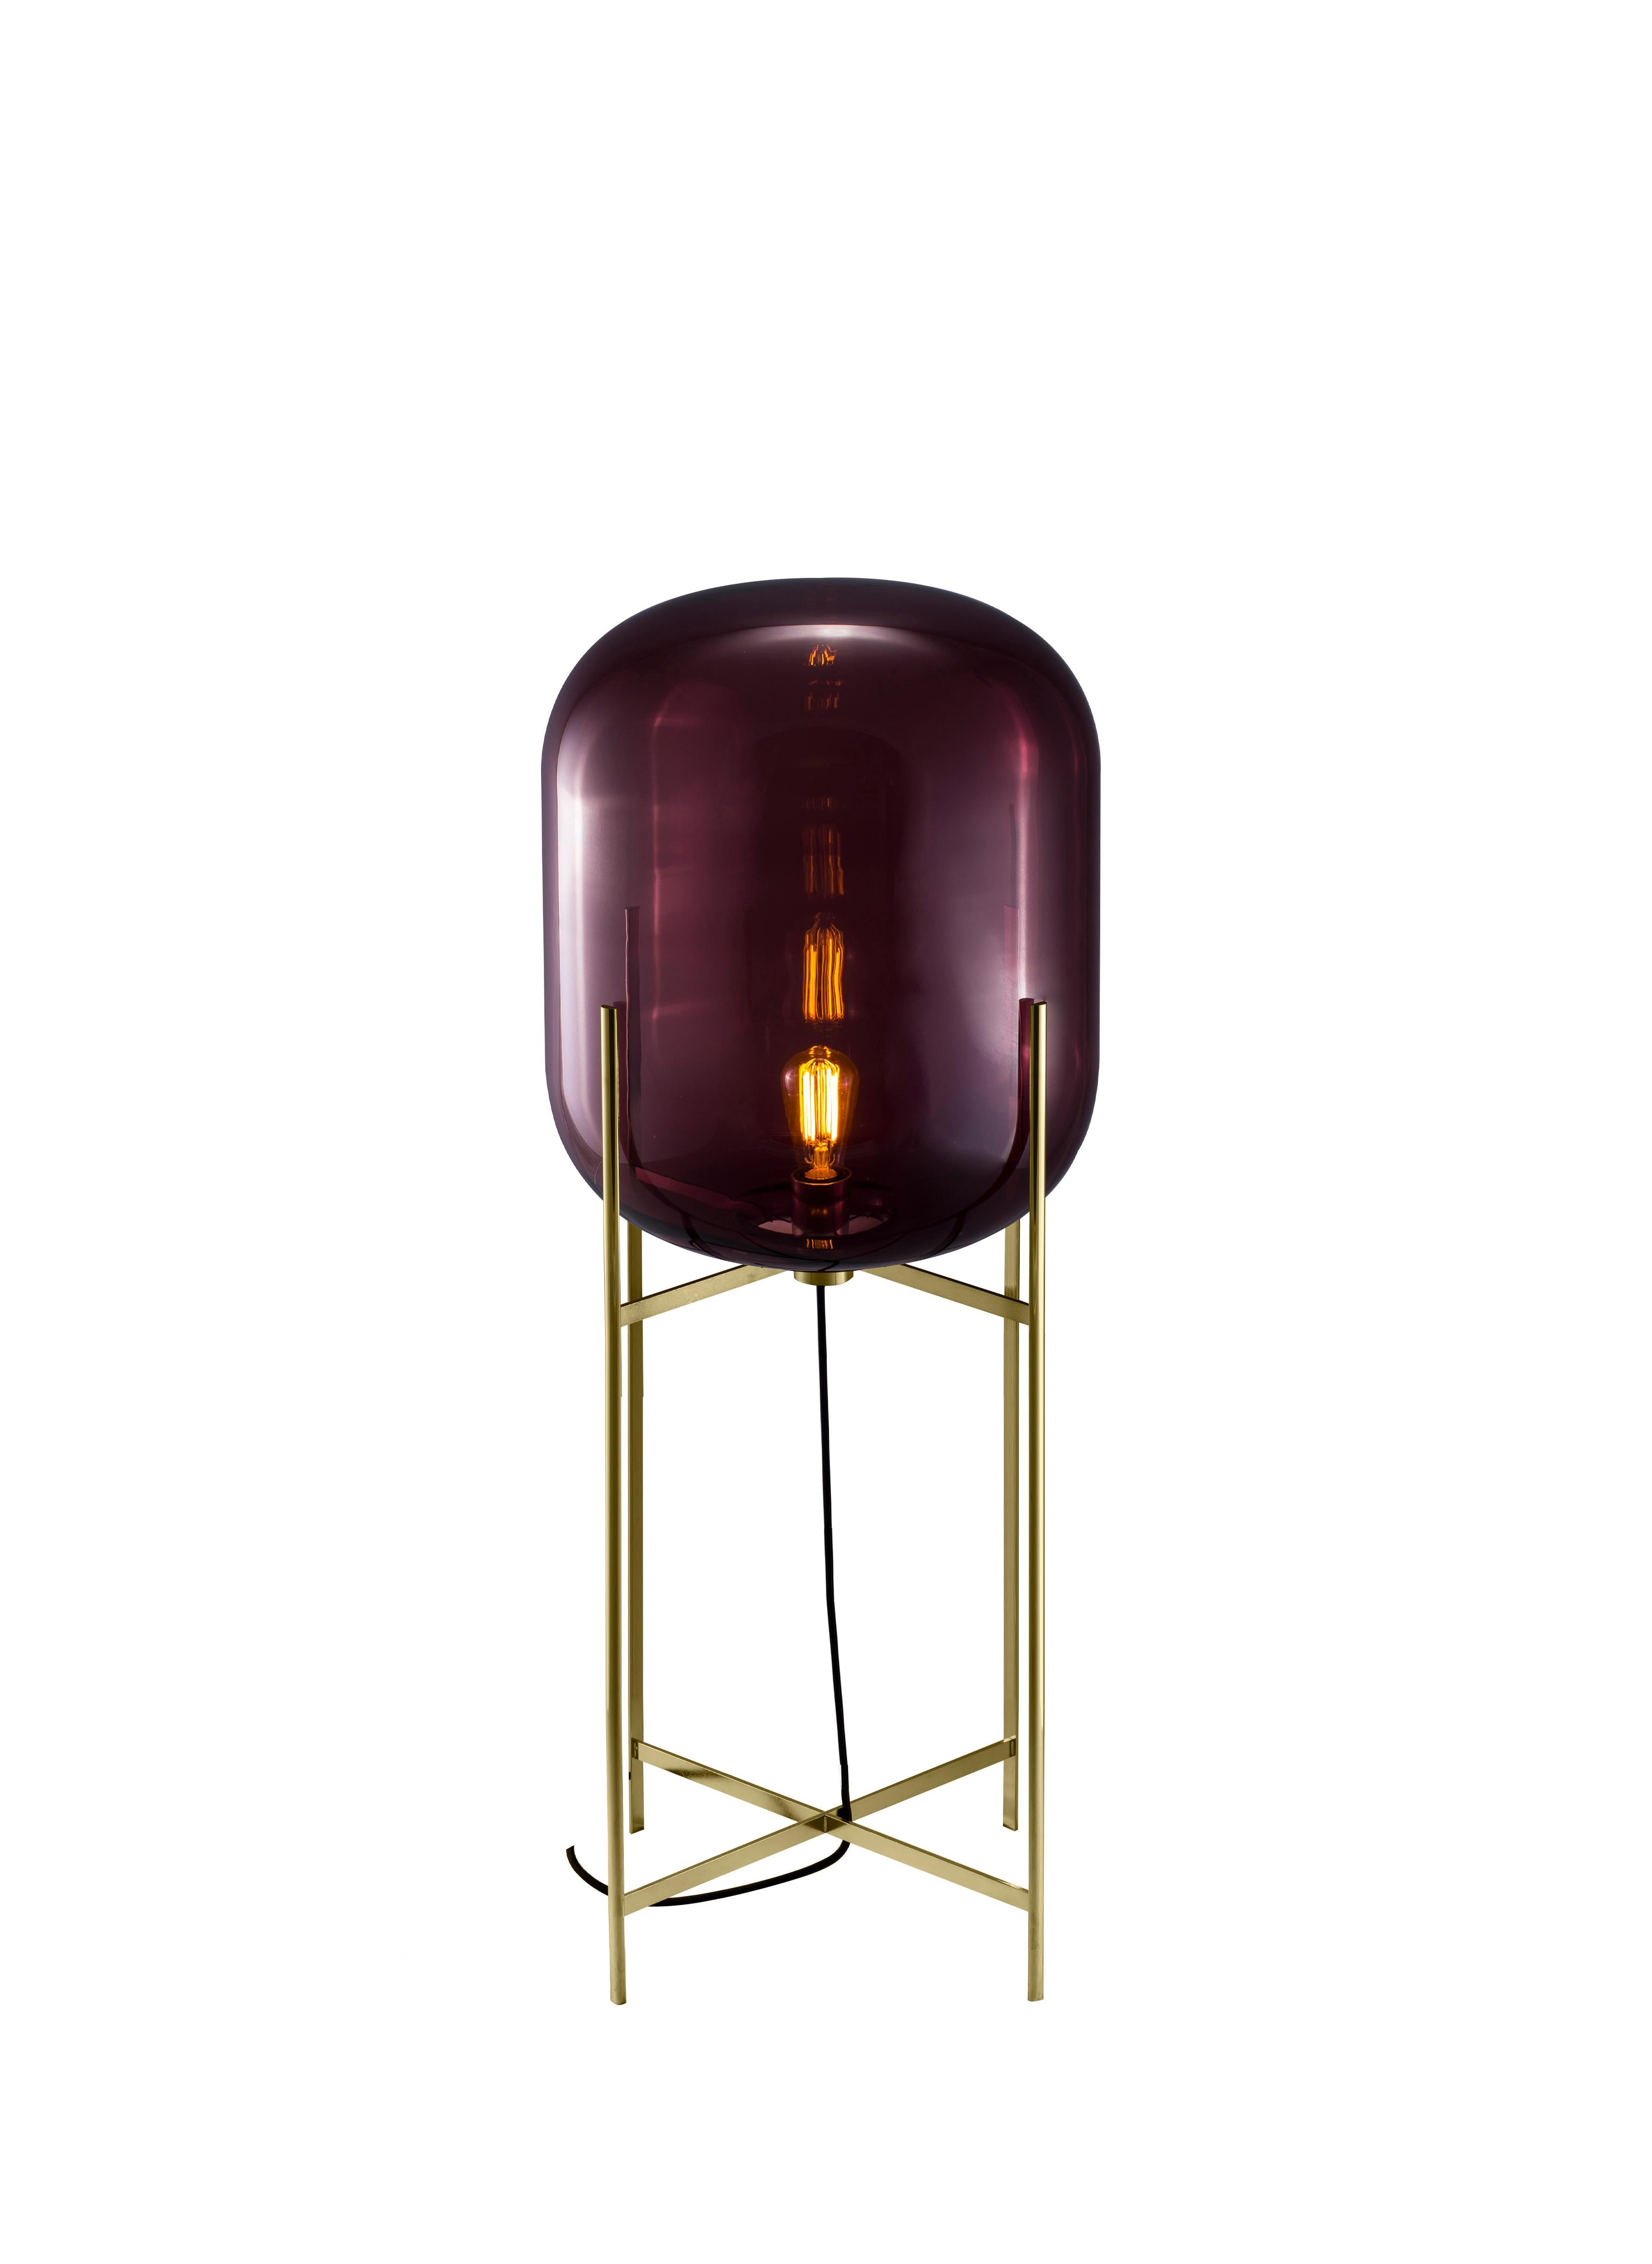 Oda in between Aubergine brass floor lamp by Pulpo
Dimensions: D45 x H111.2 cm
Materials: handblown glass coloured and steel.

Also available in different finishes.  

A slender base hugs a bulbous form. An industrial motif softened by the